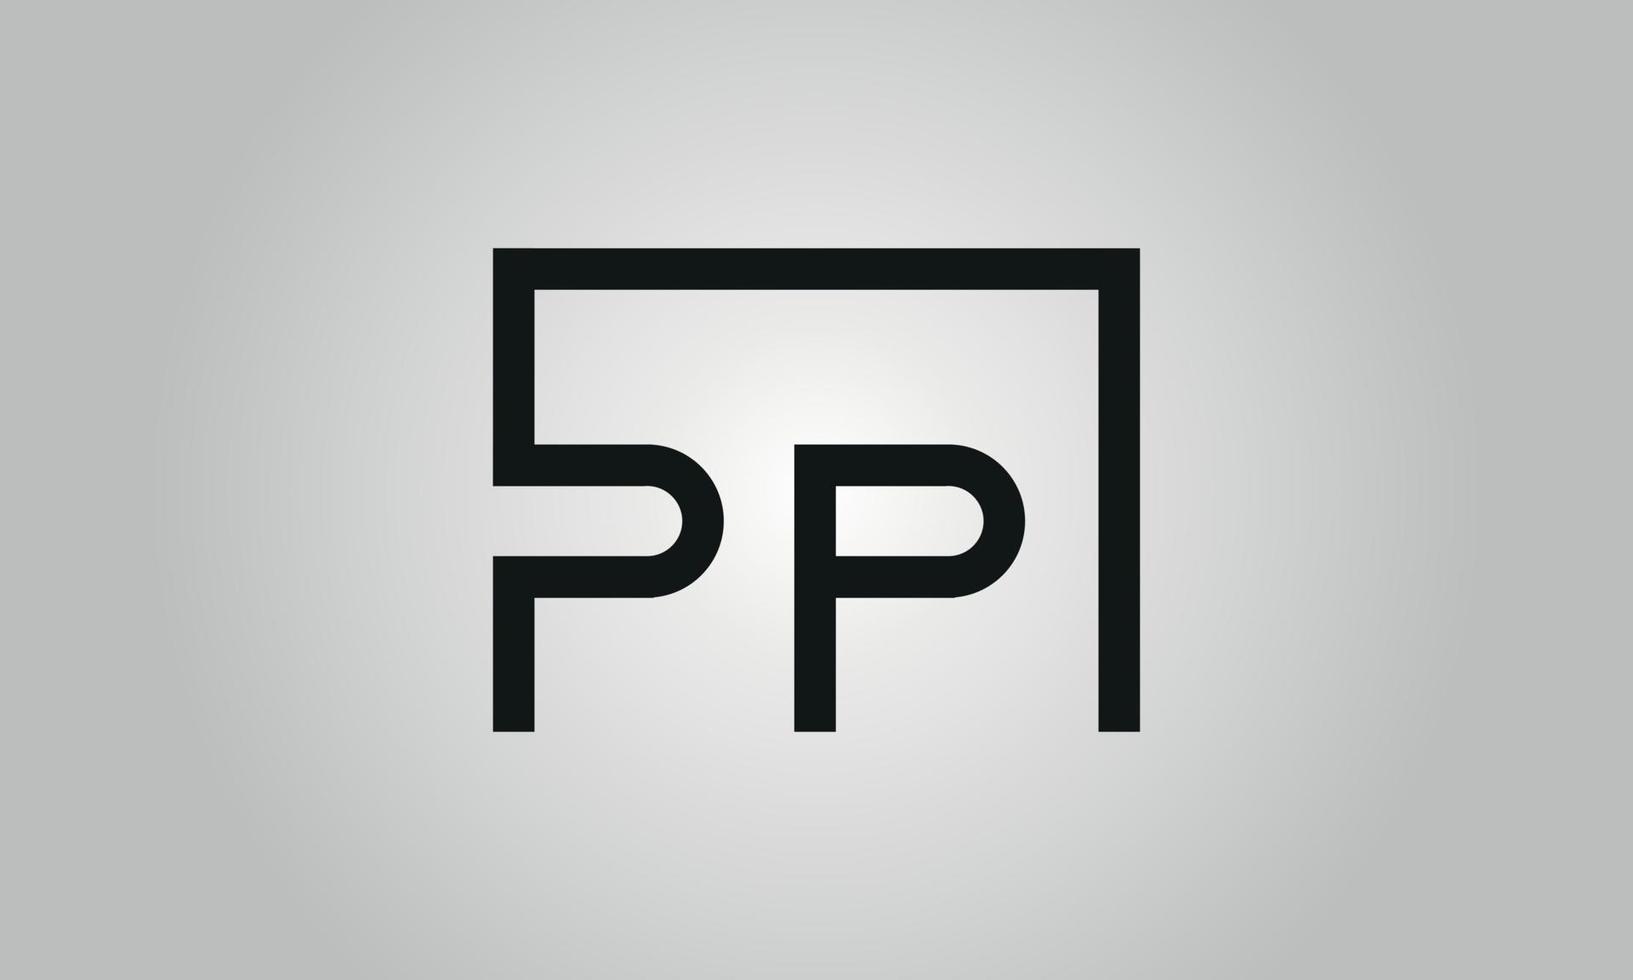 Letter PP logo design. PP logo with square shape in black colors vector free vector template.